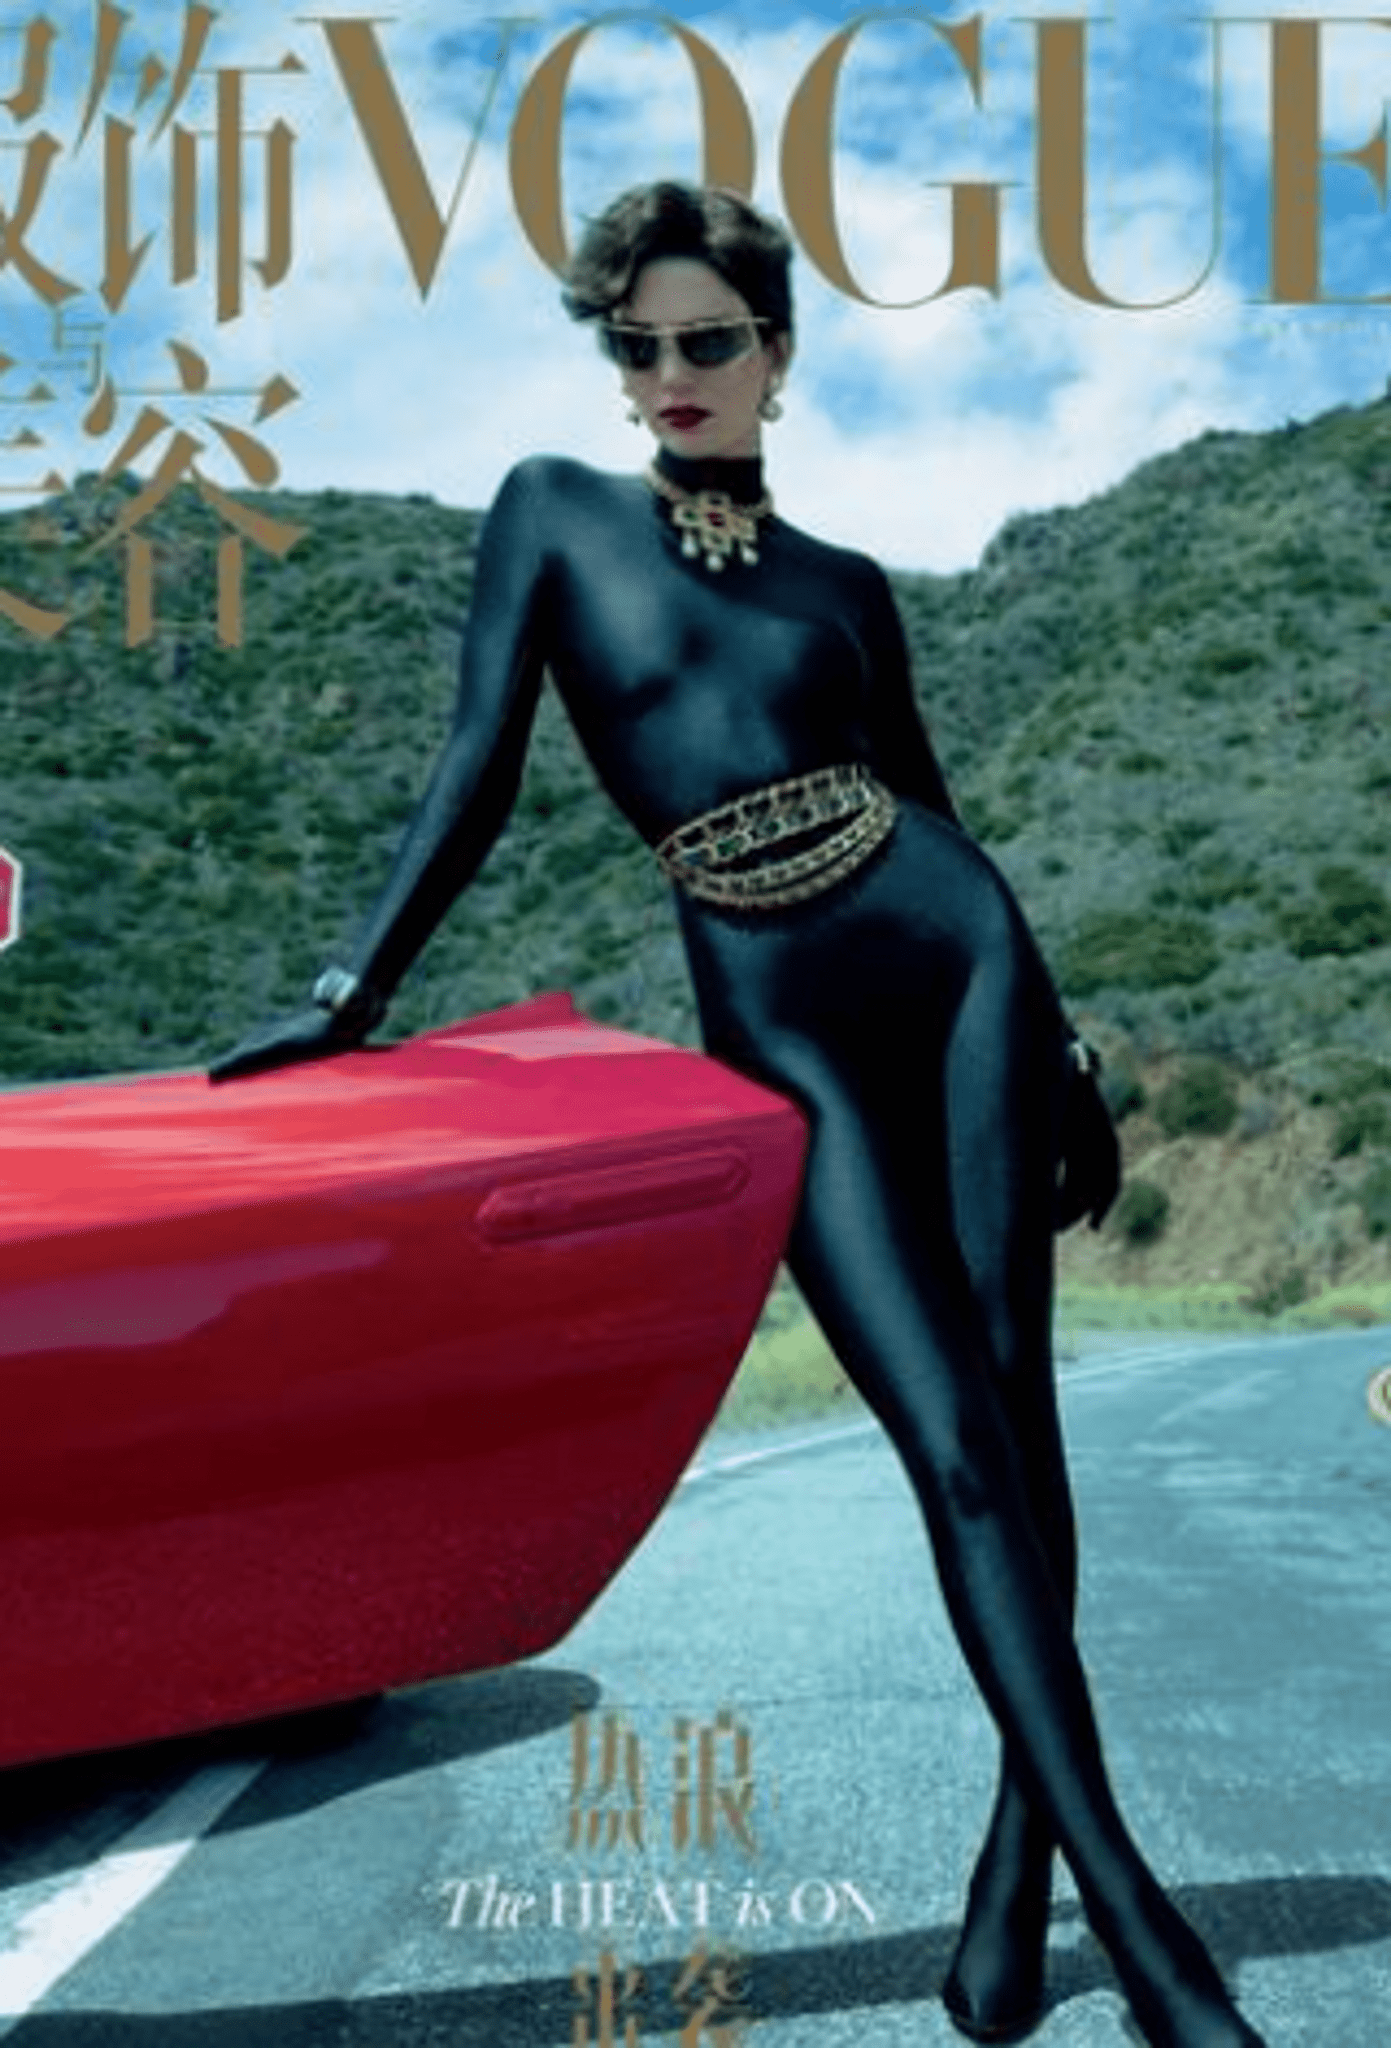 kendall-jenner-in-a-catsuit-appeared-on-the-cover-of-chinese-vogue